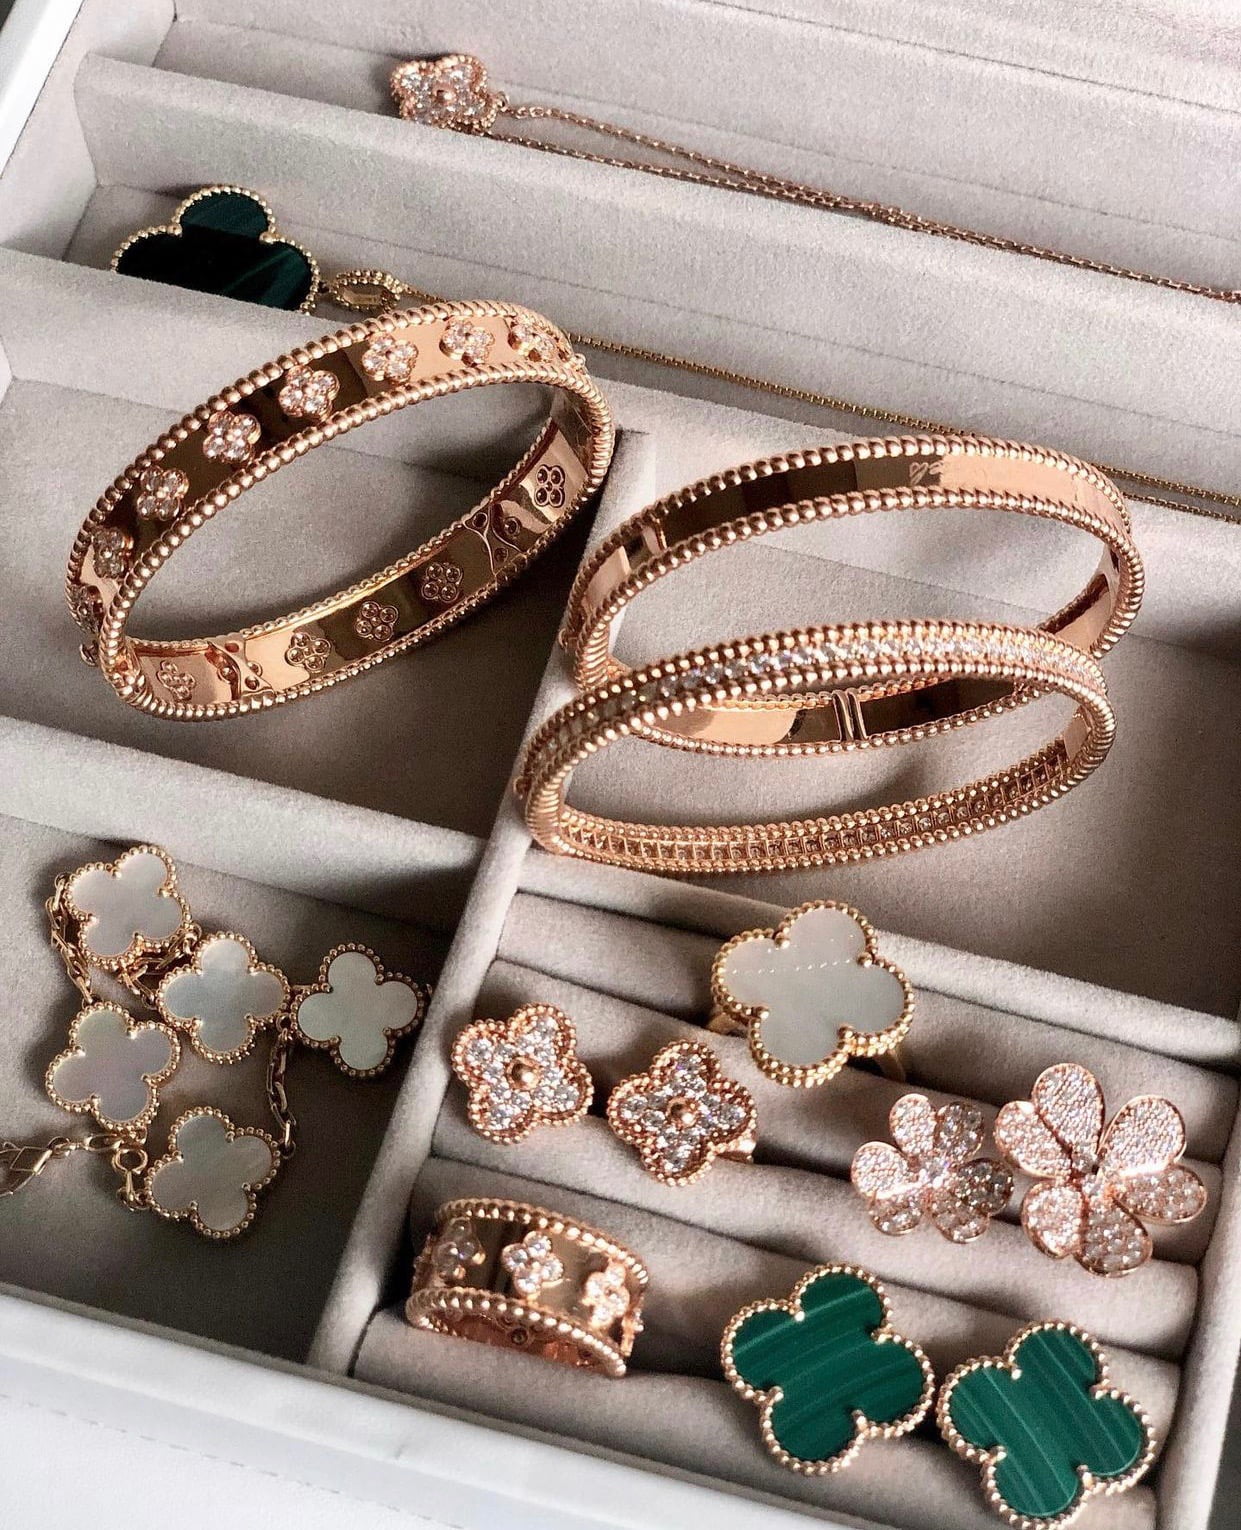 How to Curate the Perfect Van Cleef & Arpels Collection - PurseBop